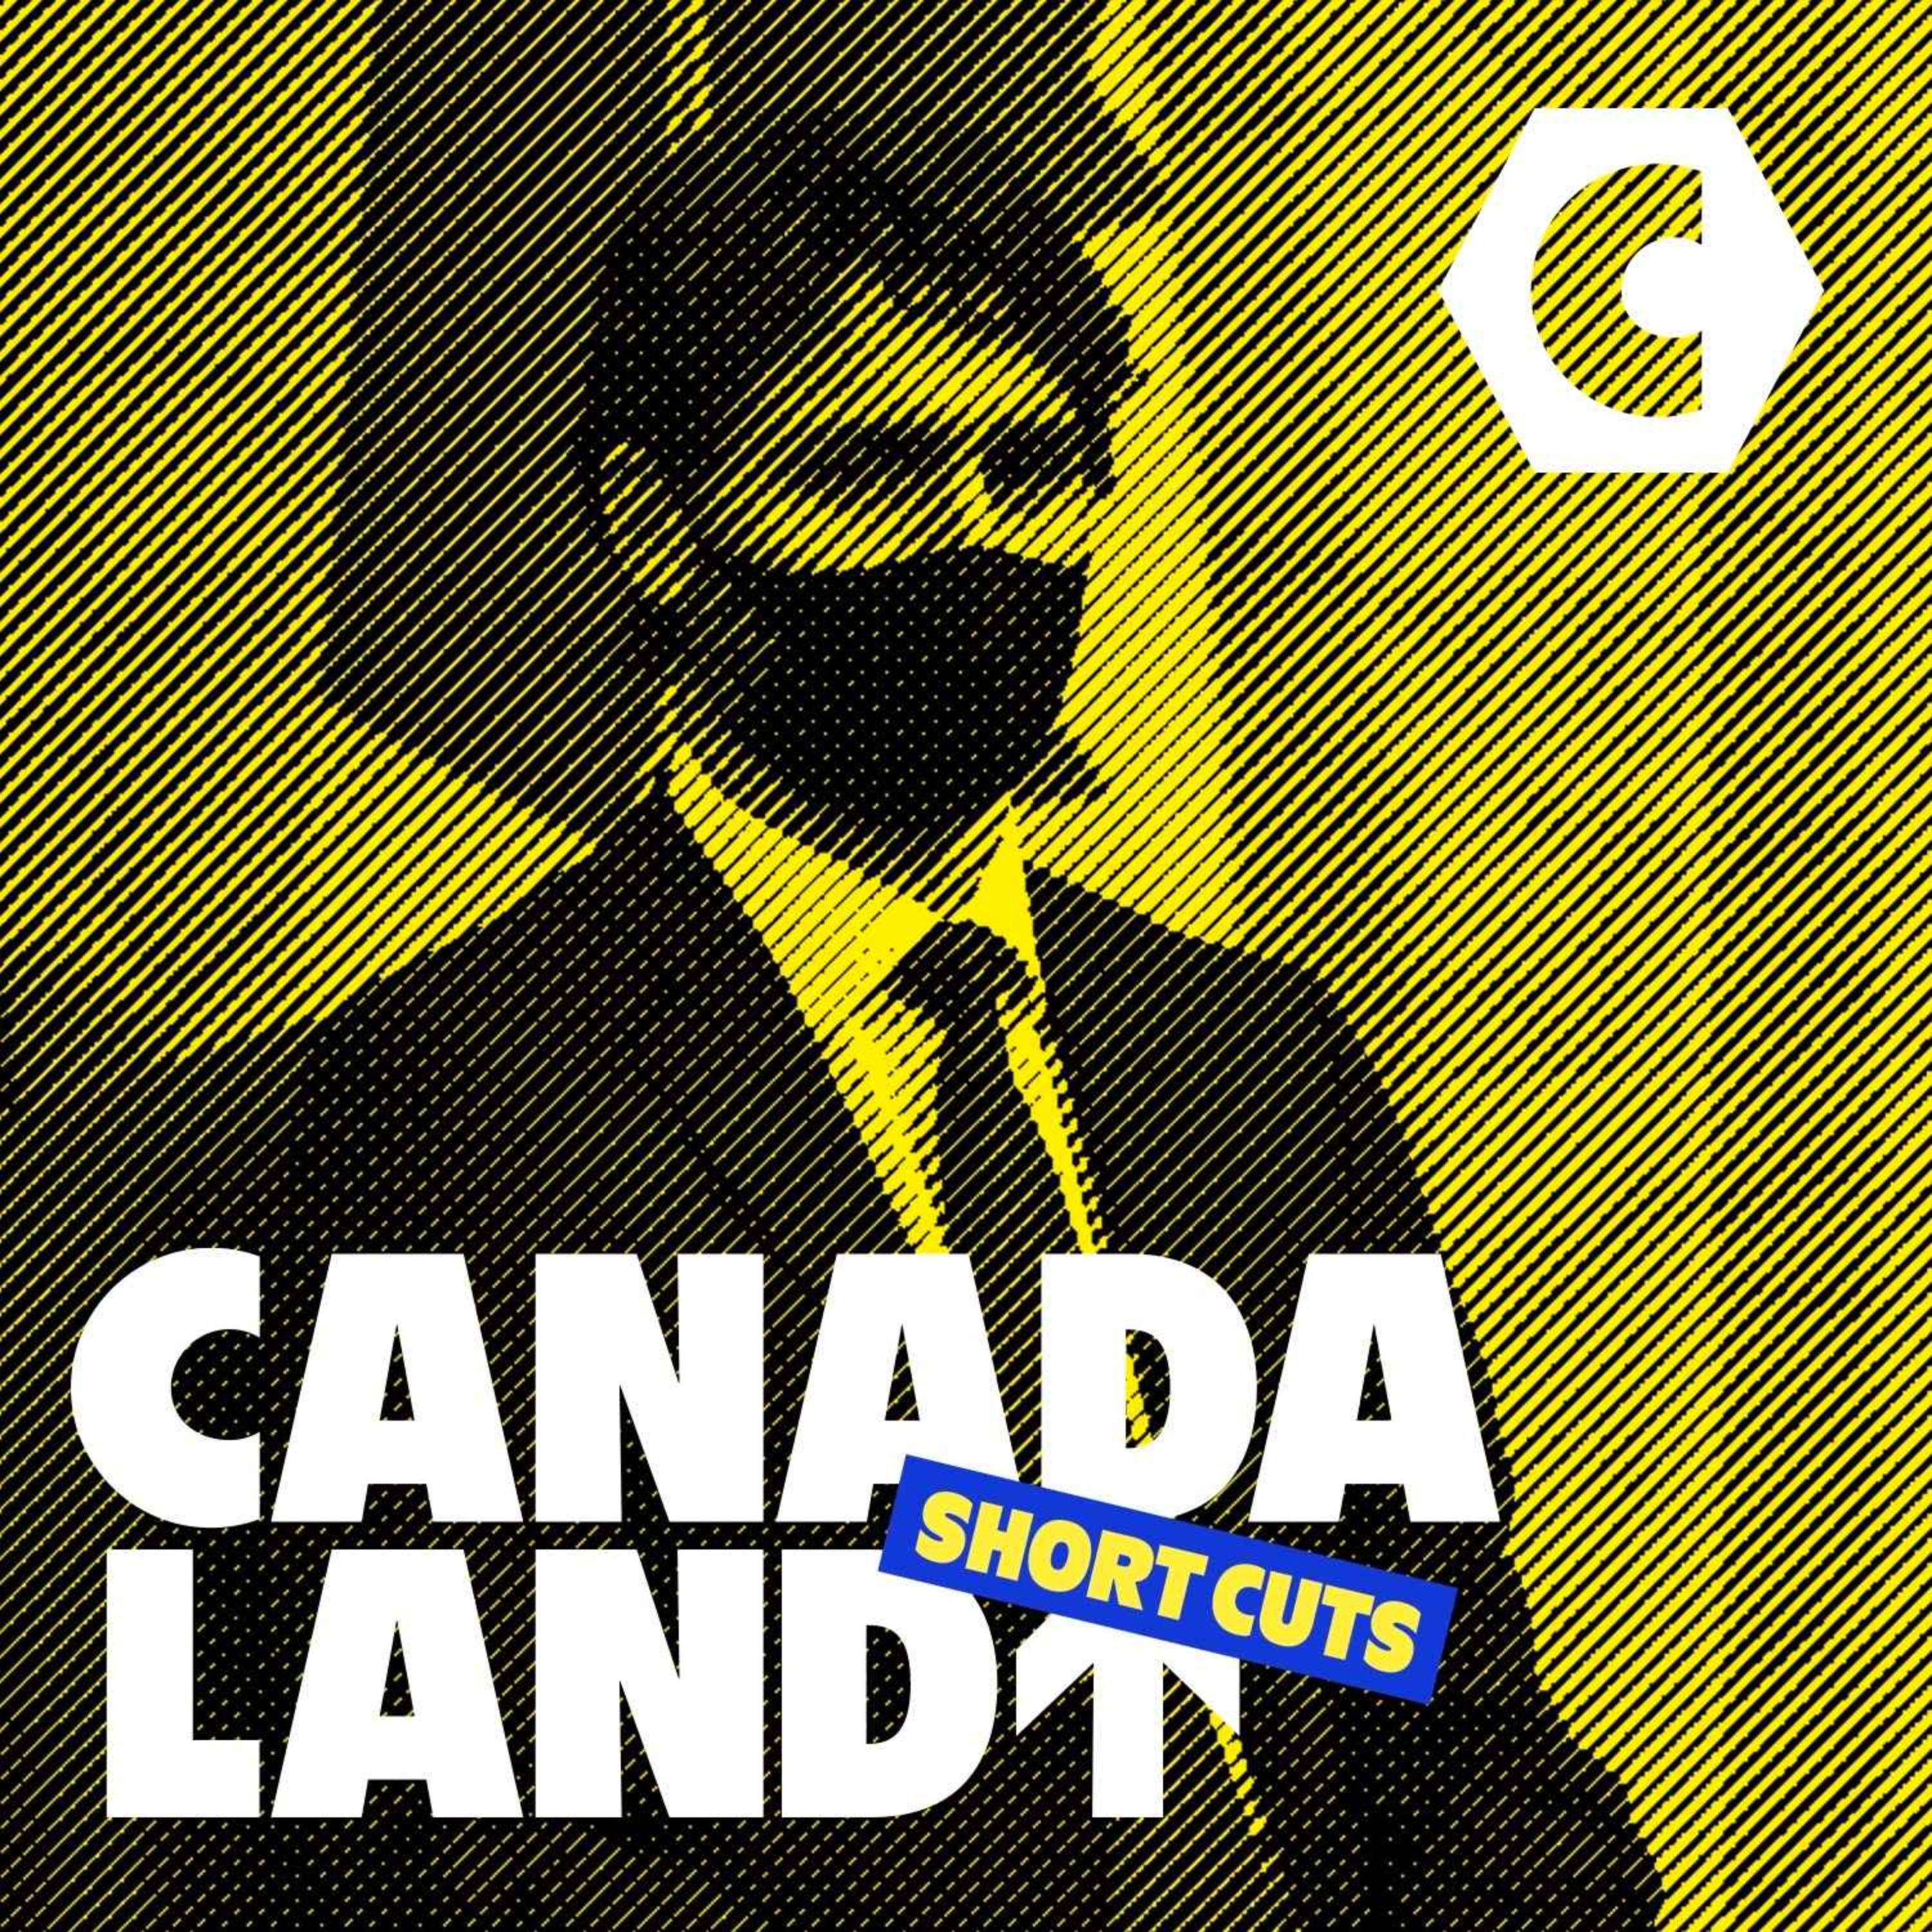 cover art for (Short Cuts) CBC Crypto Spoof, Danielle Smith Gets a Win and More